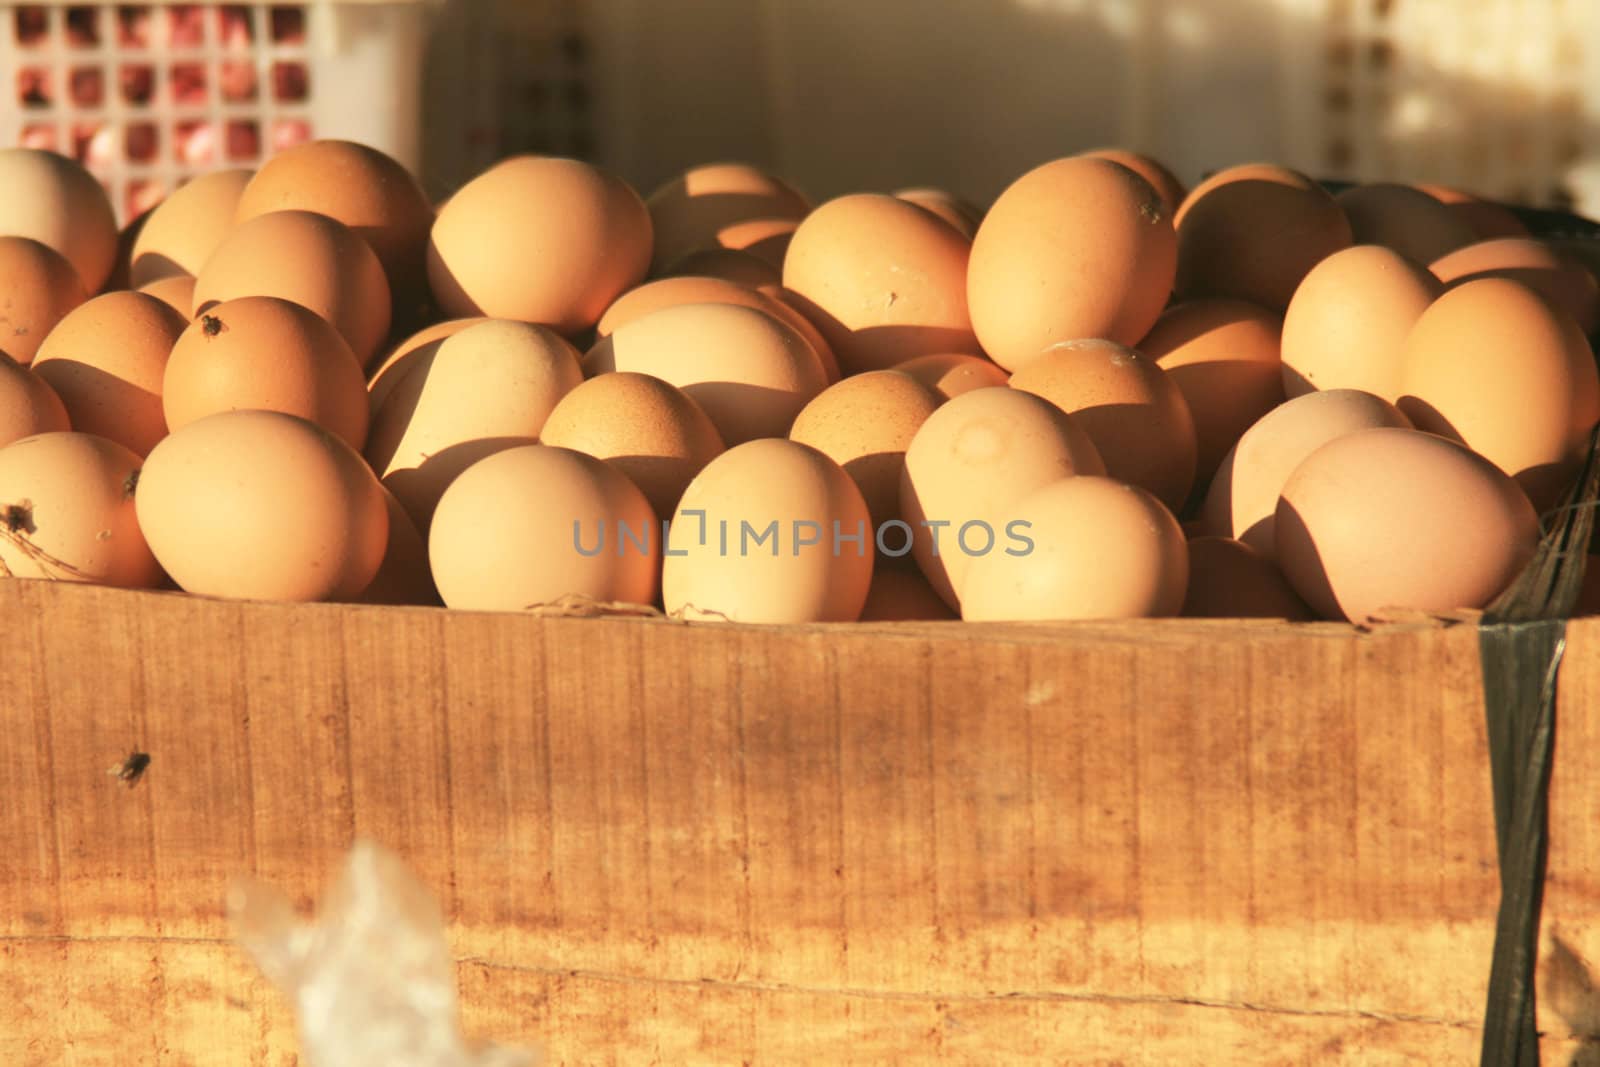 Eggs found in an old market.